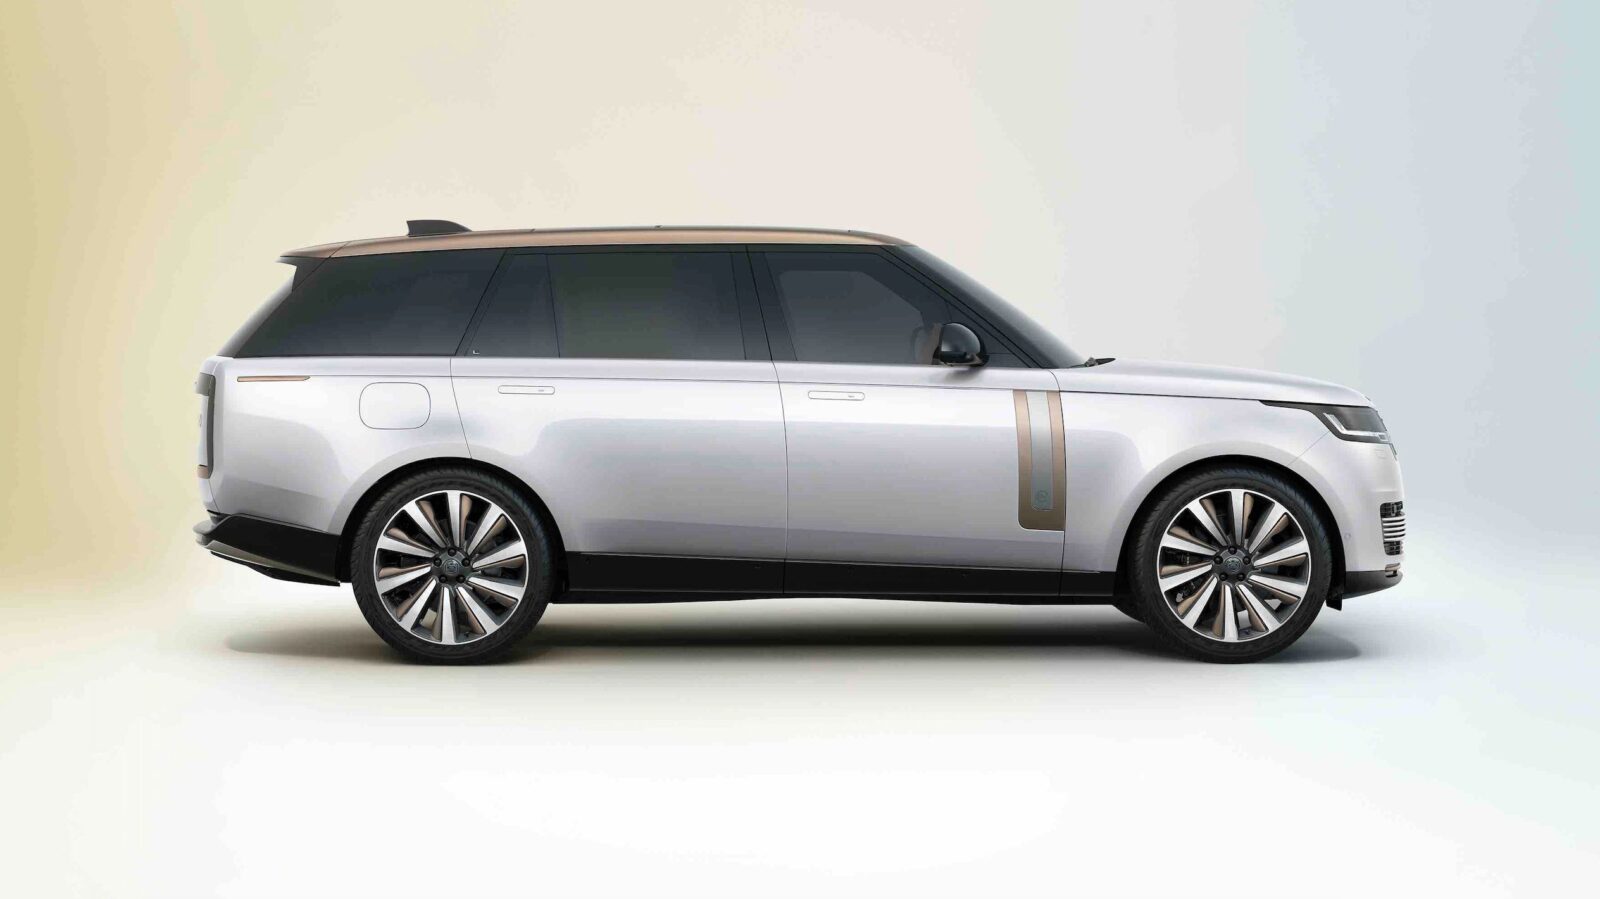 The New Range Rover silhouette in silver